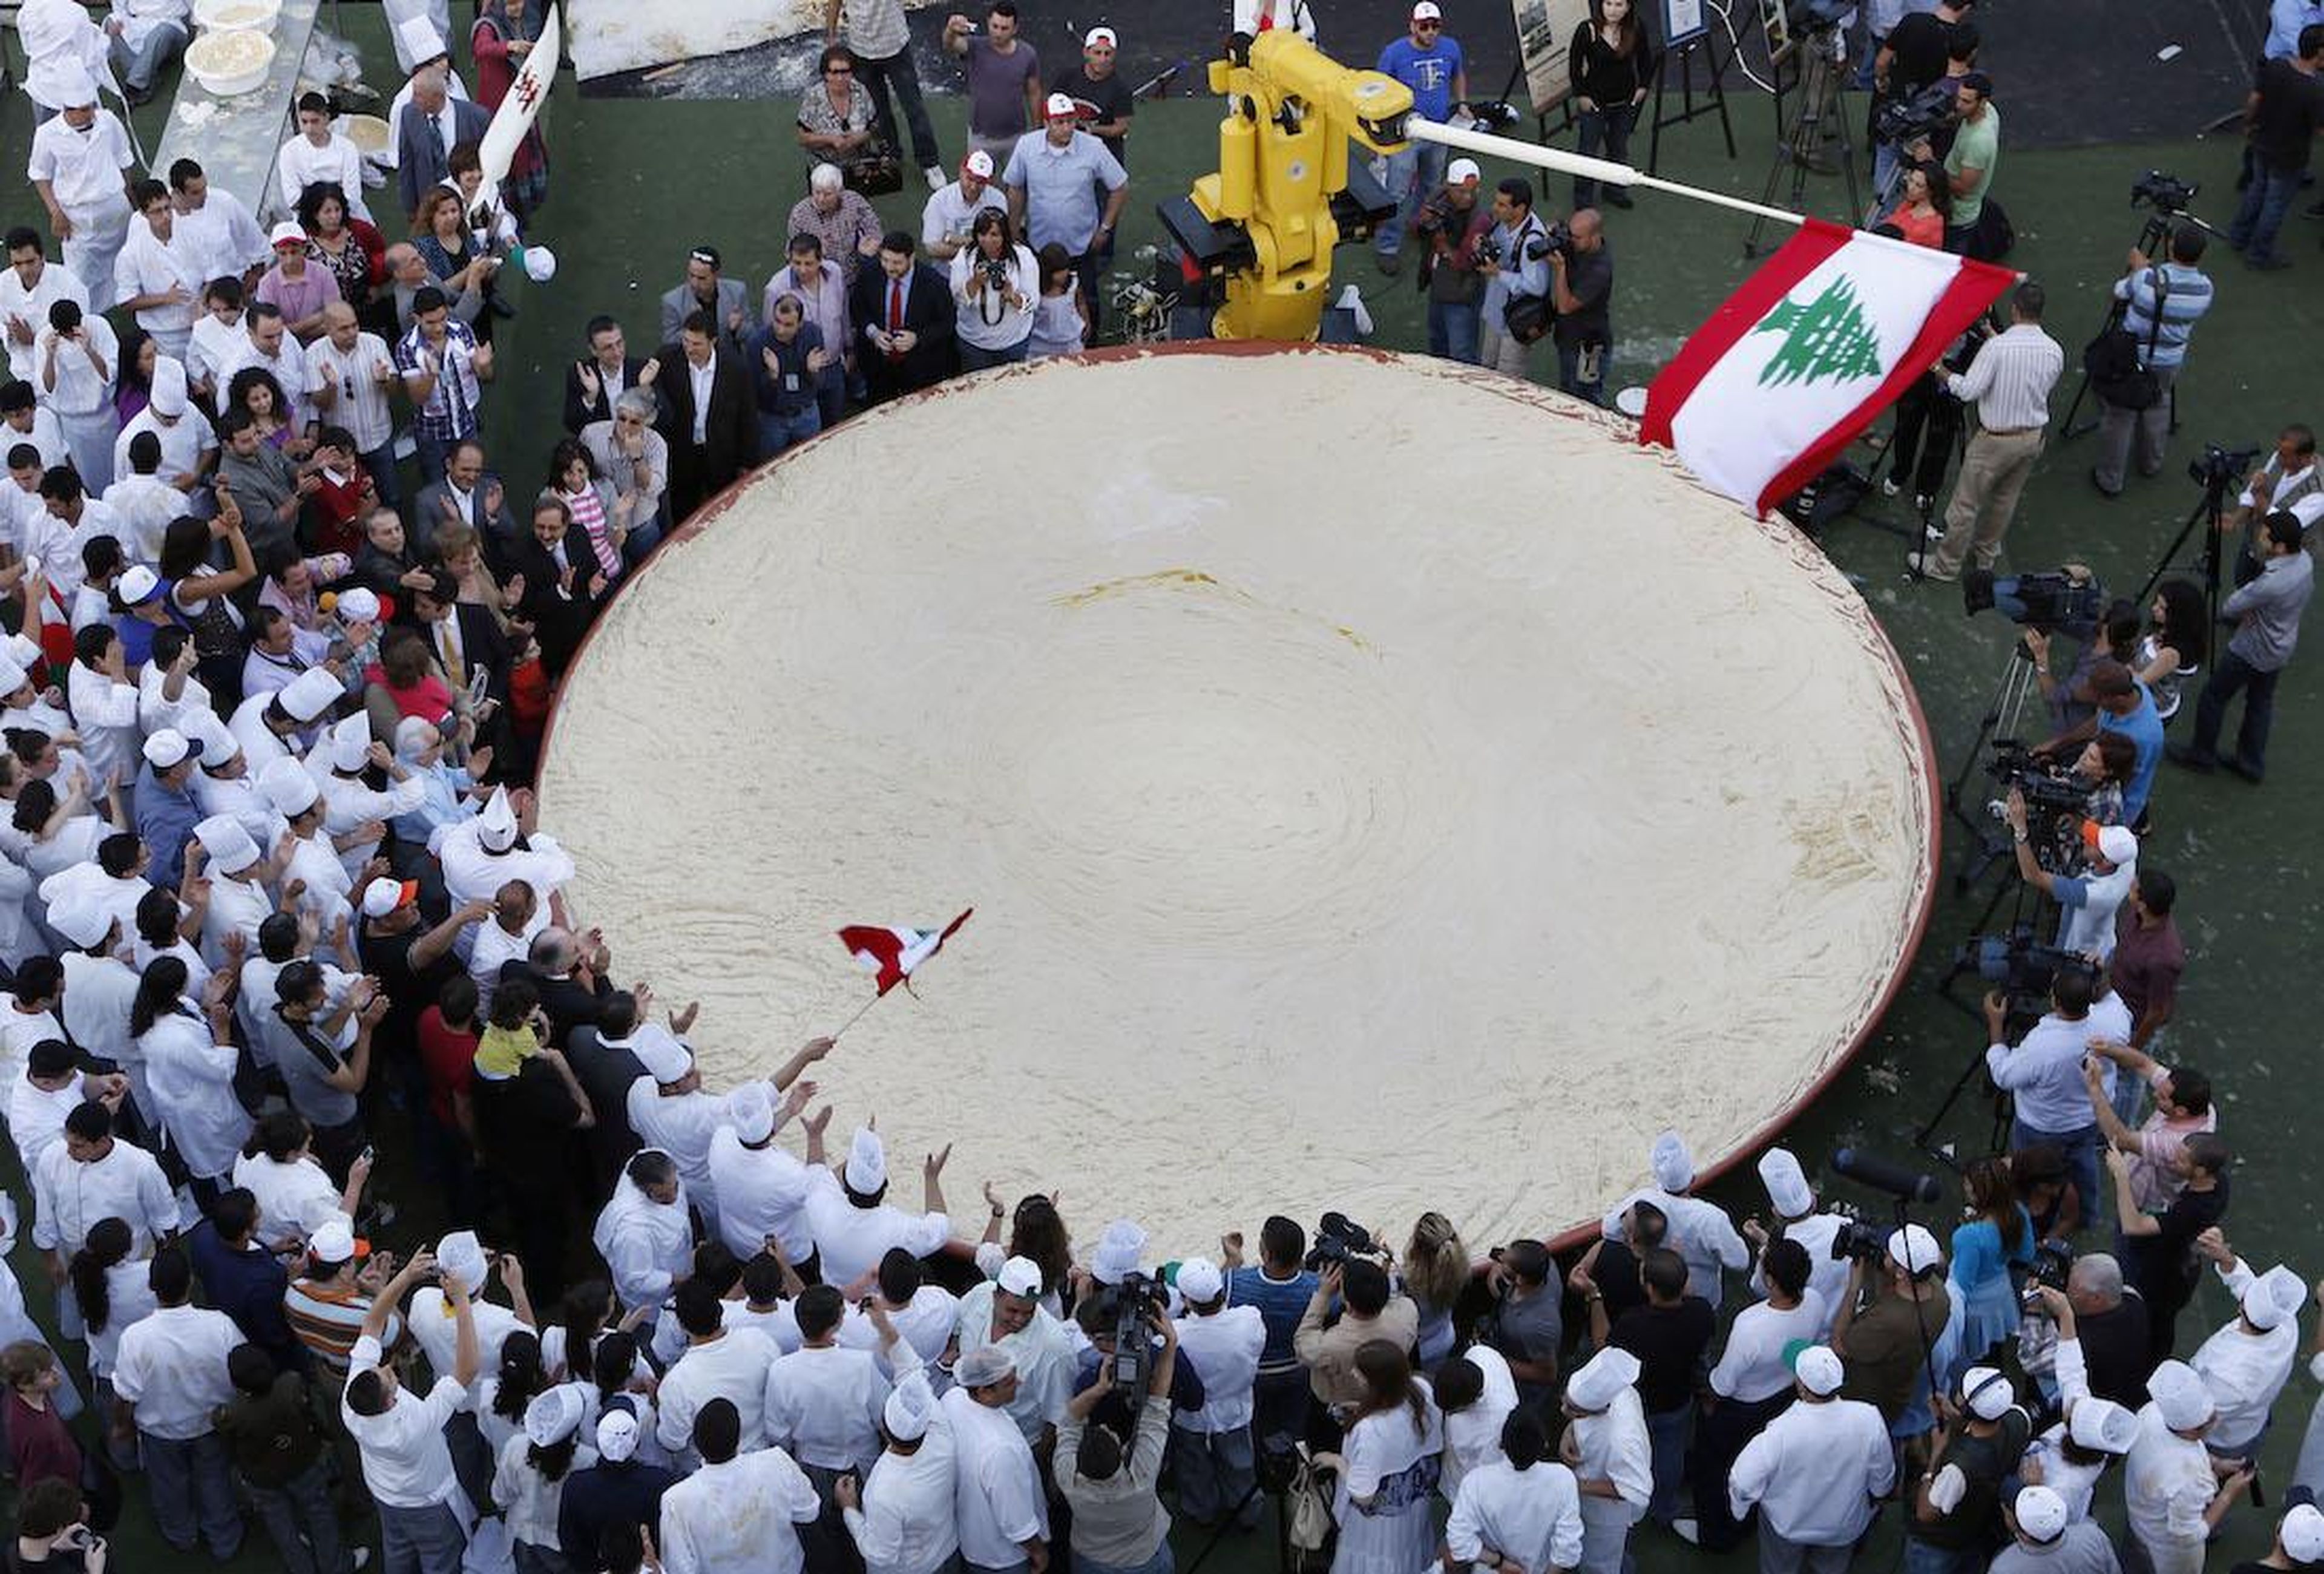 Lebanese chefs prepared a record-breaking bowl of hummus in 2010 that weighed in at 22,046 pounds (10,452 kilograms.)